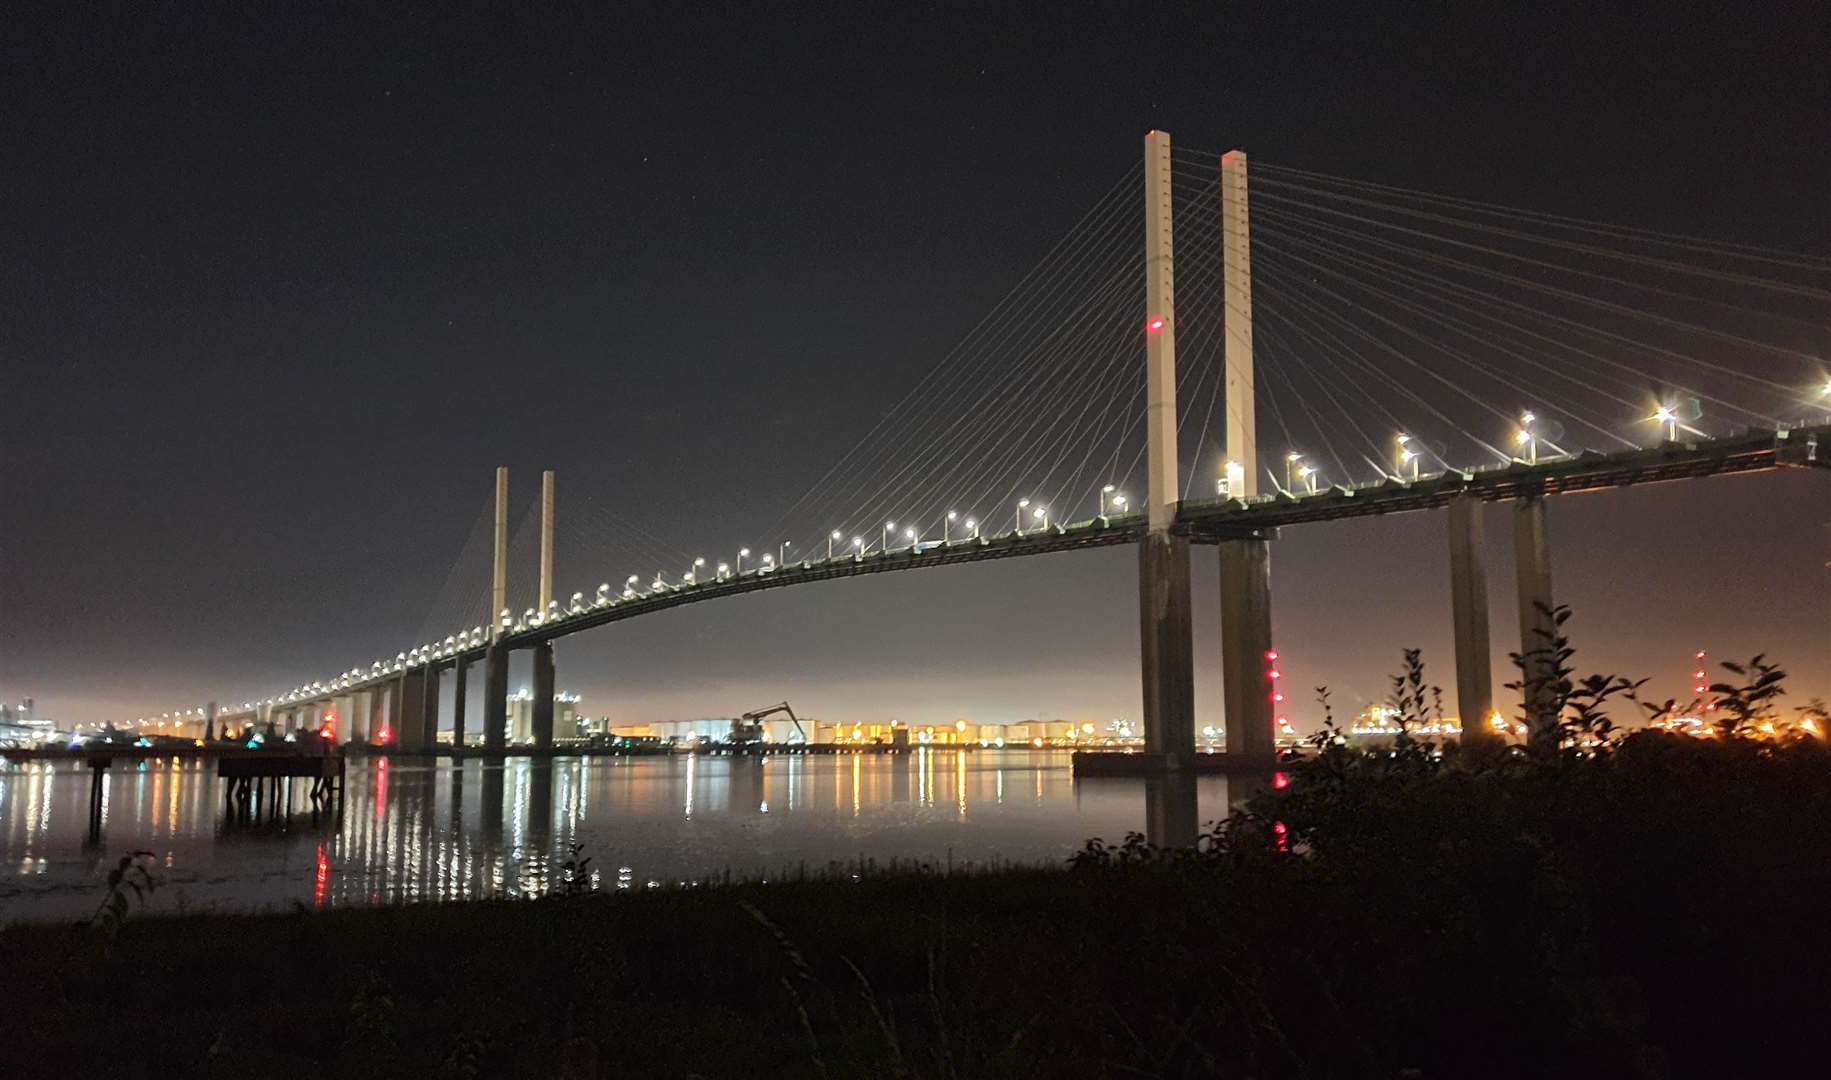 Dart Charge is the payment system in place for the Dartford Crossing